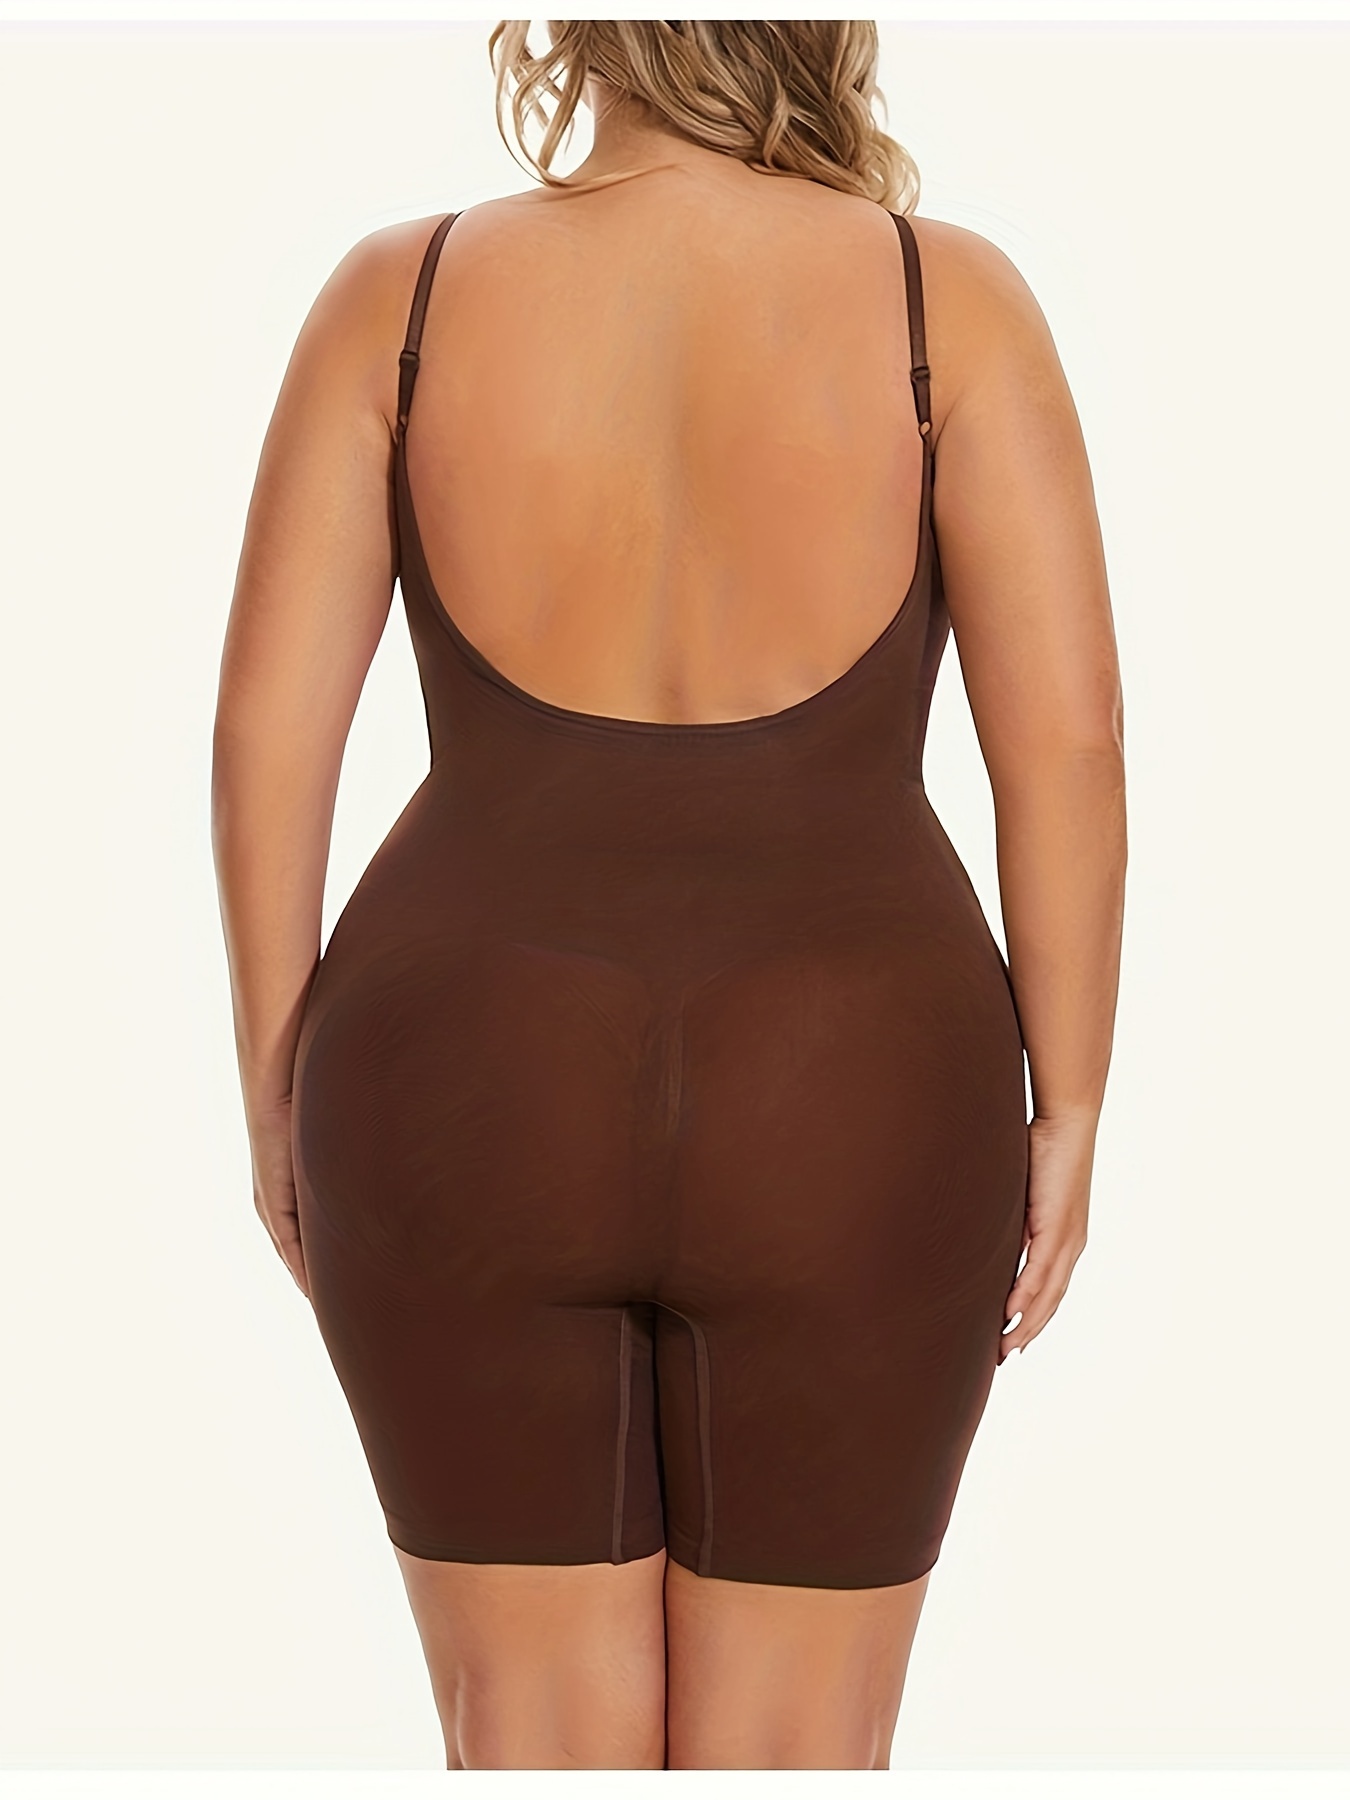 Women's Simple Shapewear Bodysuit, Plus Size Tummy Control Butt Lifting Open  Back Seamless Full Body Shaper, Don't Miss These Great Deals